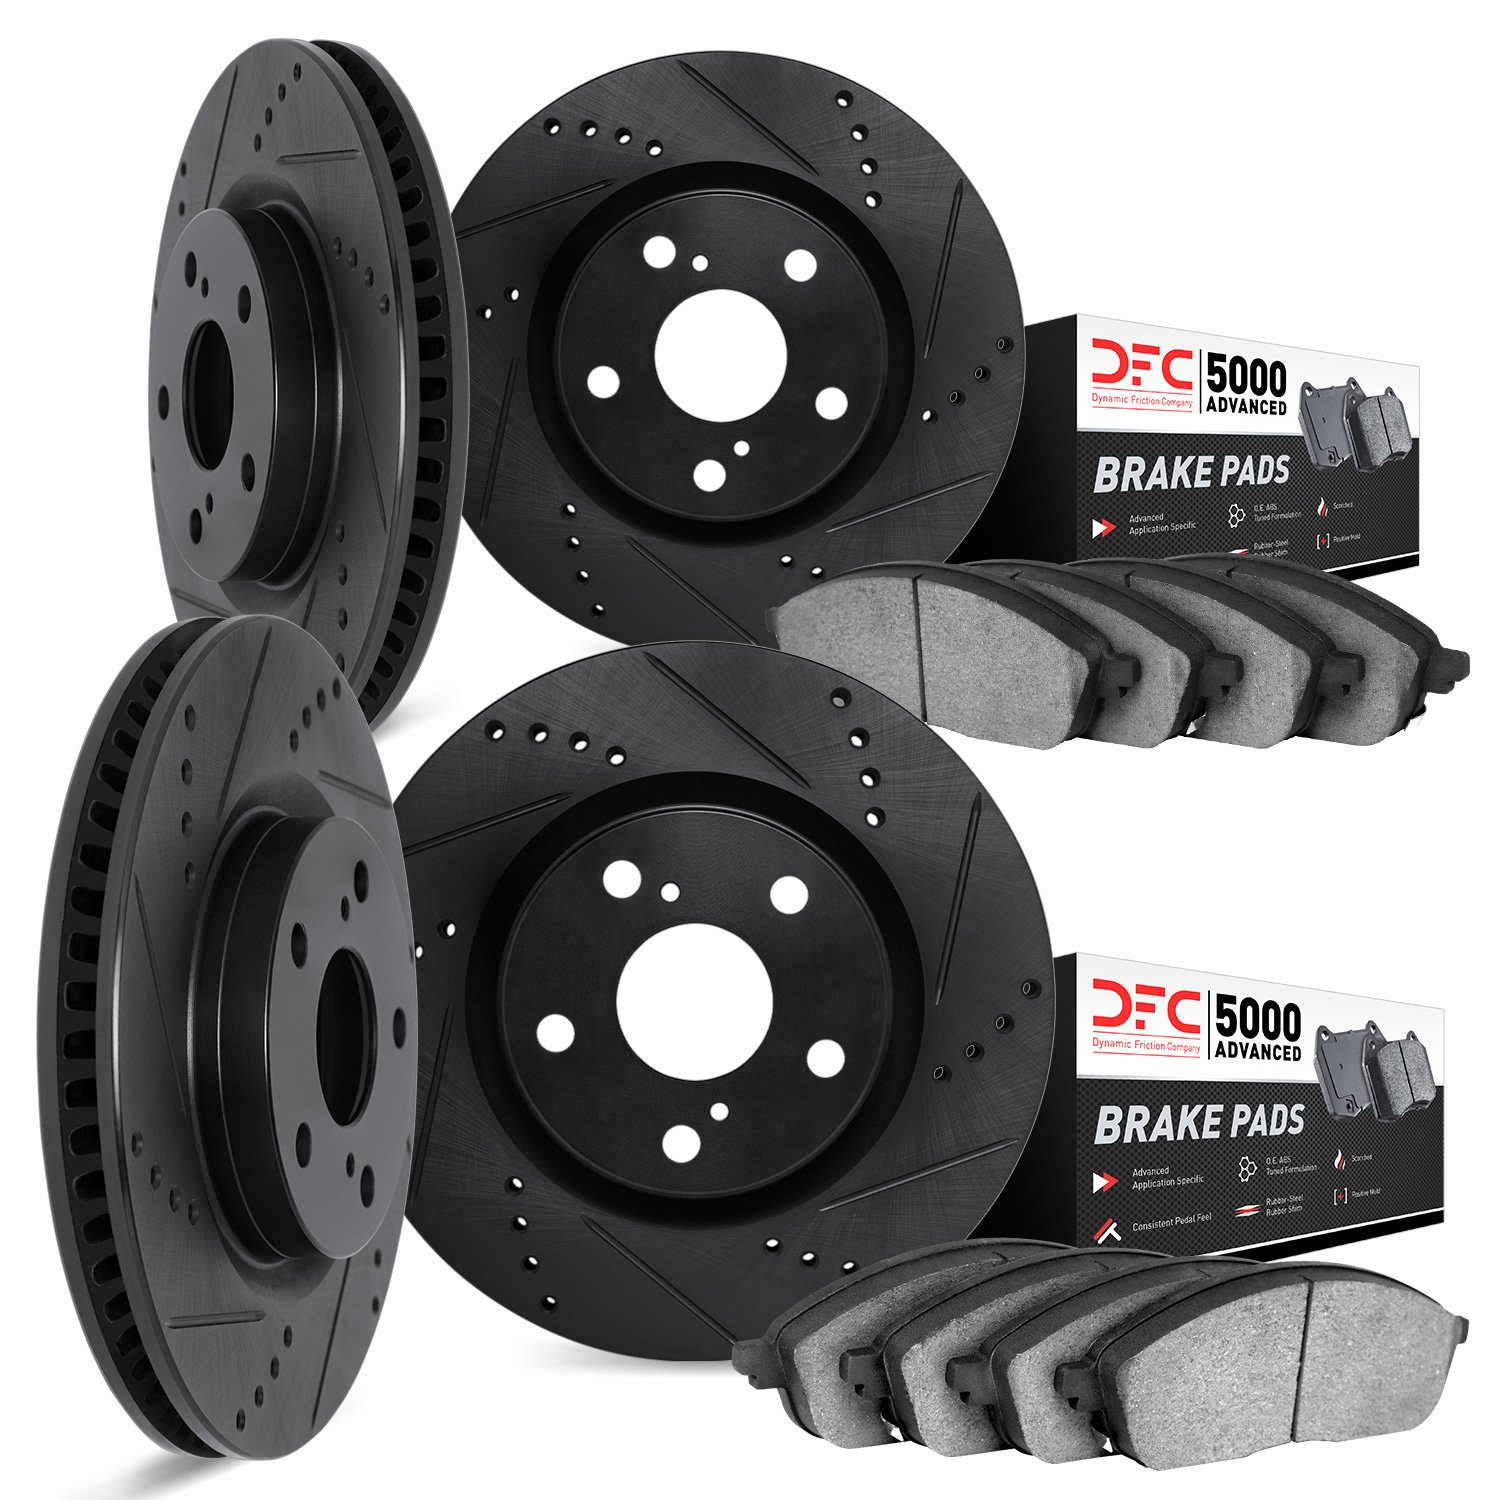 8504-31015 Drilled/Slotted Brake Rotors w/5000 Advanced Brake Pads Kit [Black], 2008-2010 BMW, Position: Front and Rear